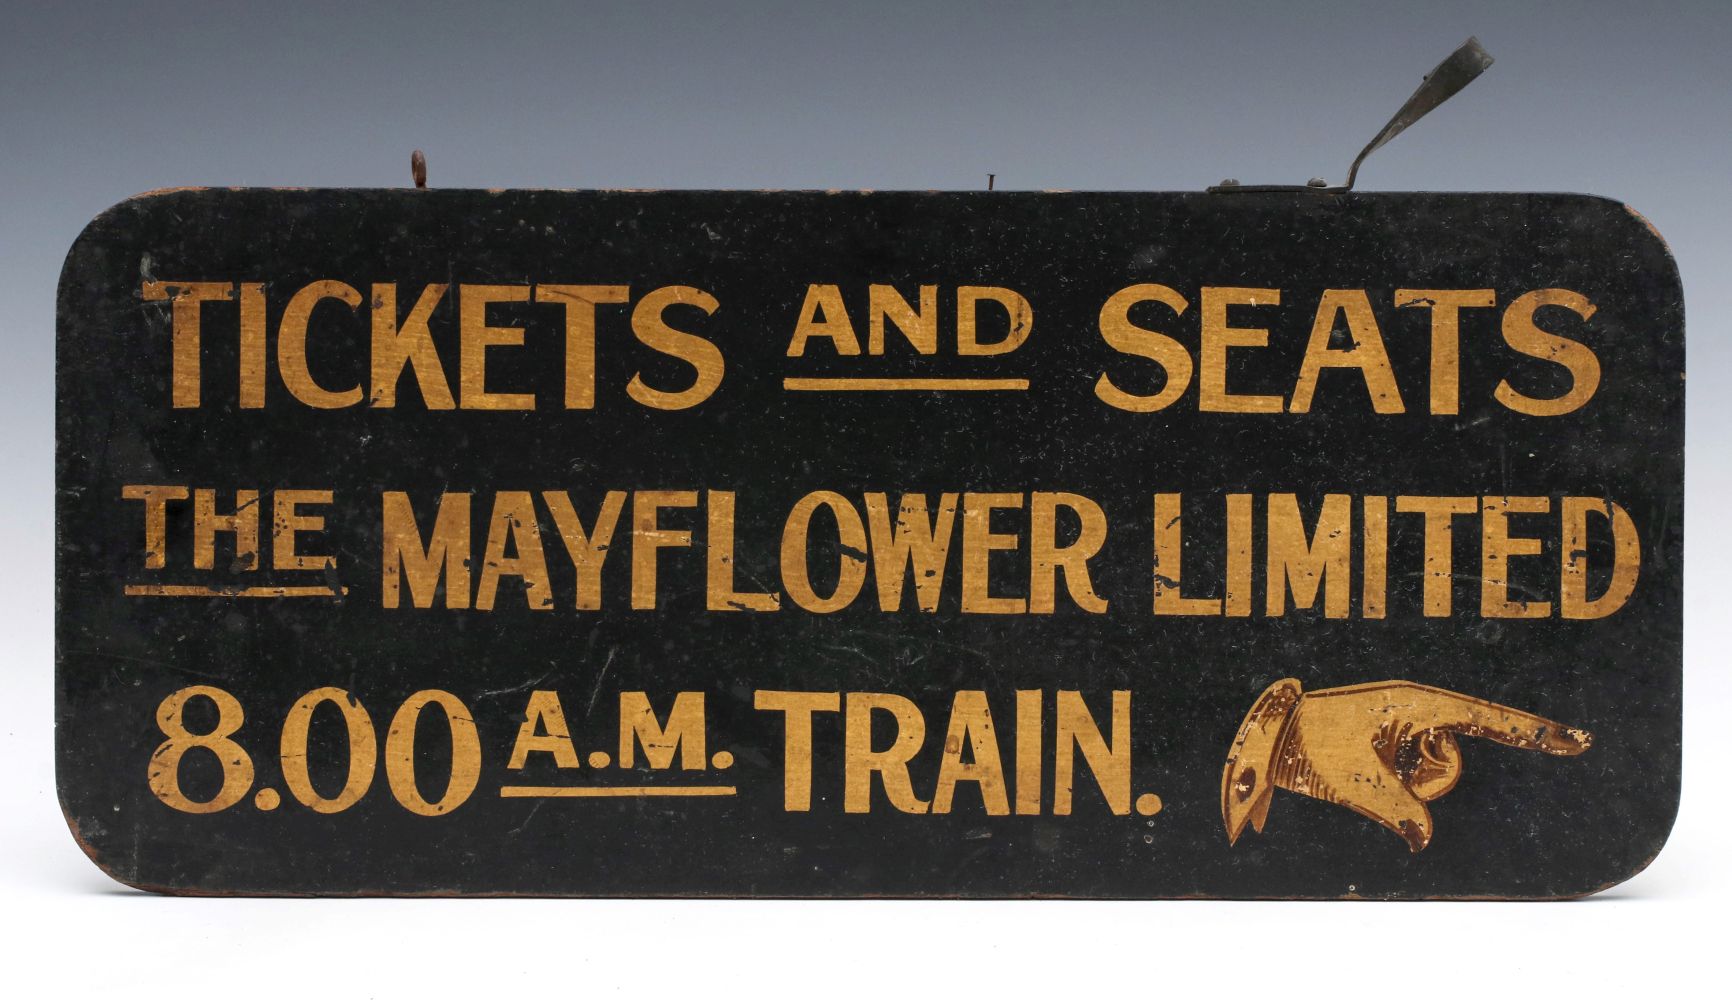 TICKETS AND SEATS THE MAYFLOWER LIMITED 8:00 AM TRAIN